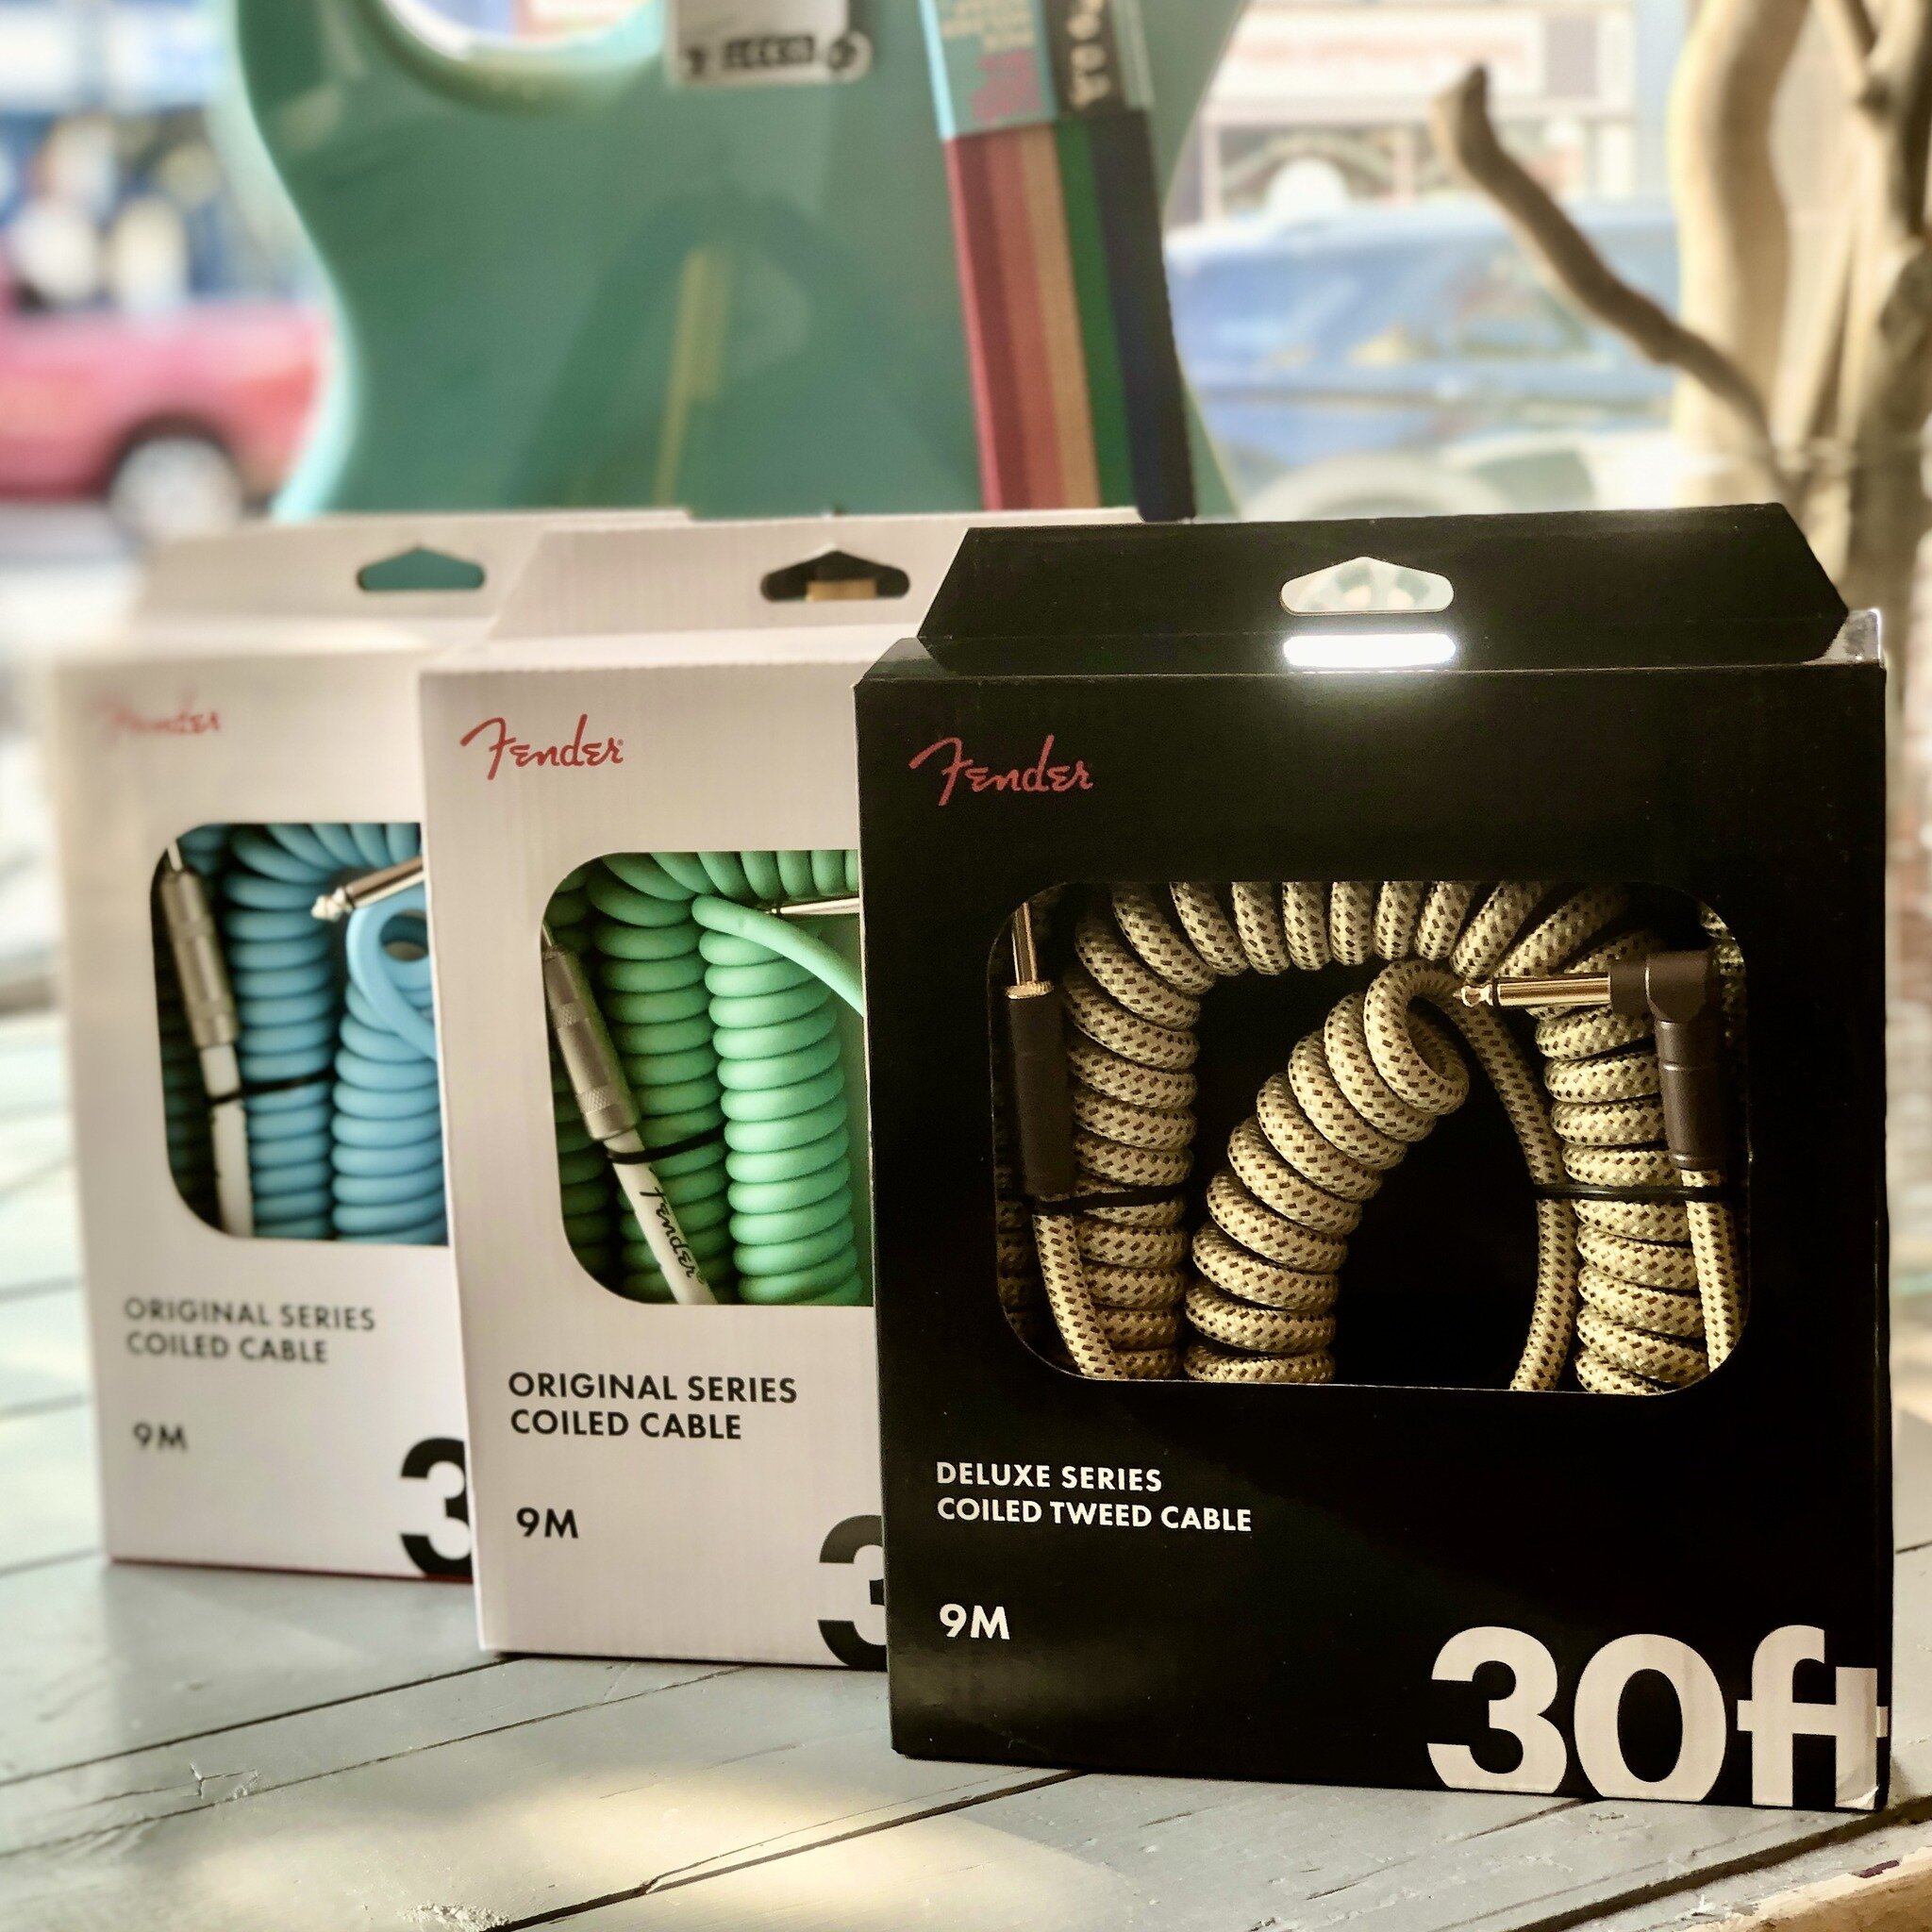 Now at 25% off as part of our Summer Sale, the Fender Original Series Coil Cable (in Surf Green and Daphne Blue) and Fender Coiled Tweed Guitar Cables are built with top grade materials and specs to ensure optimal performance and killer looks. Check 